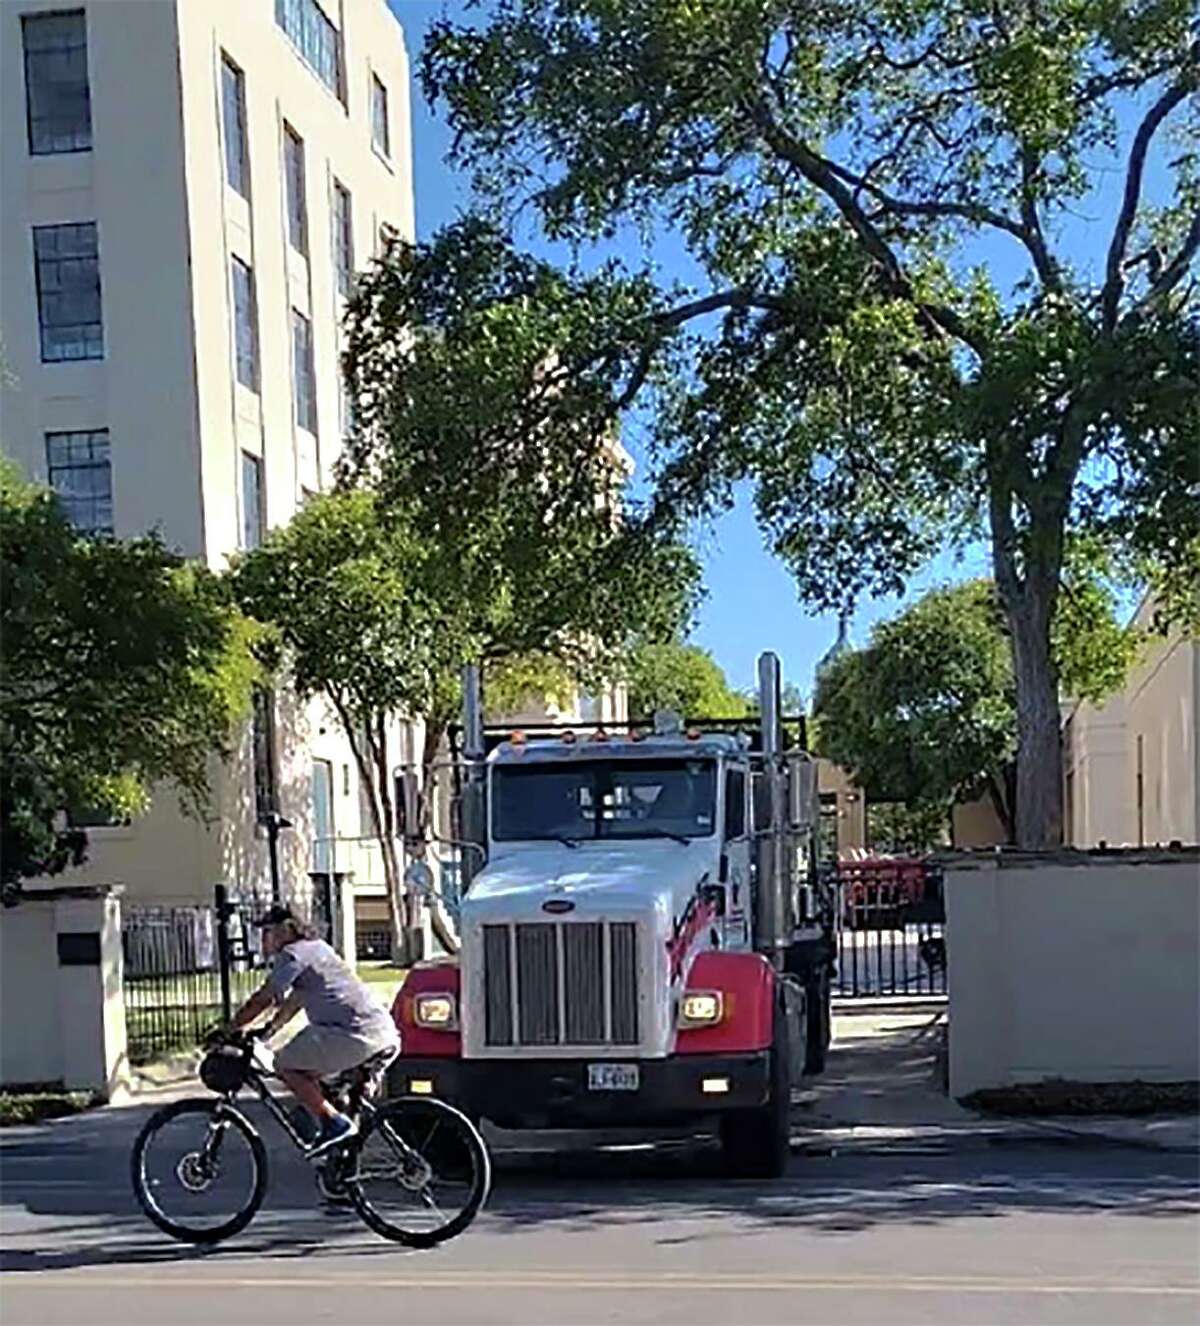 San Antonio attorney Rene D. Ruiz, who lives on East Arsenal Street across from H-E-B’s headquarters, has called the grocery chain a public nuisance. As part of his complaint, Ruiz included as exhibits numerous photos of trucks operated by H-E-B vendors that he alleges were blocking the sidewalk and/or the bike lane next to its headquarters.